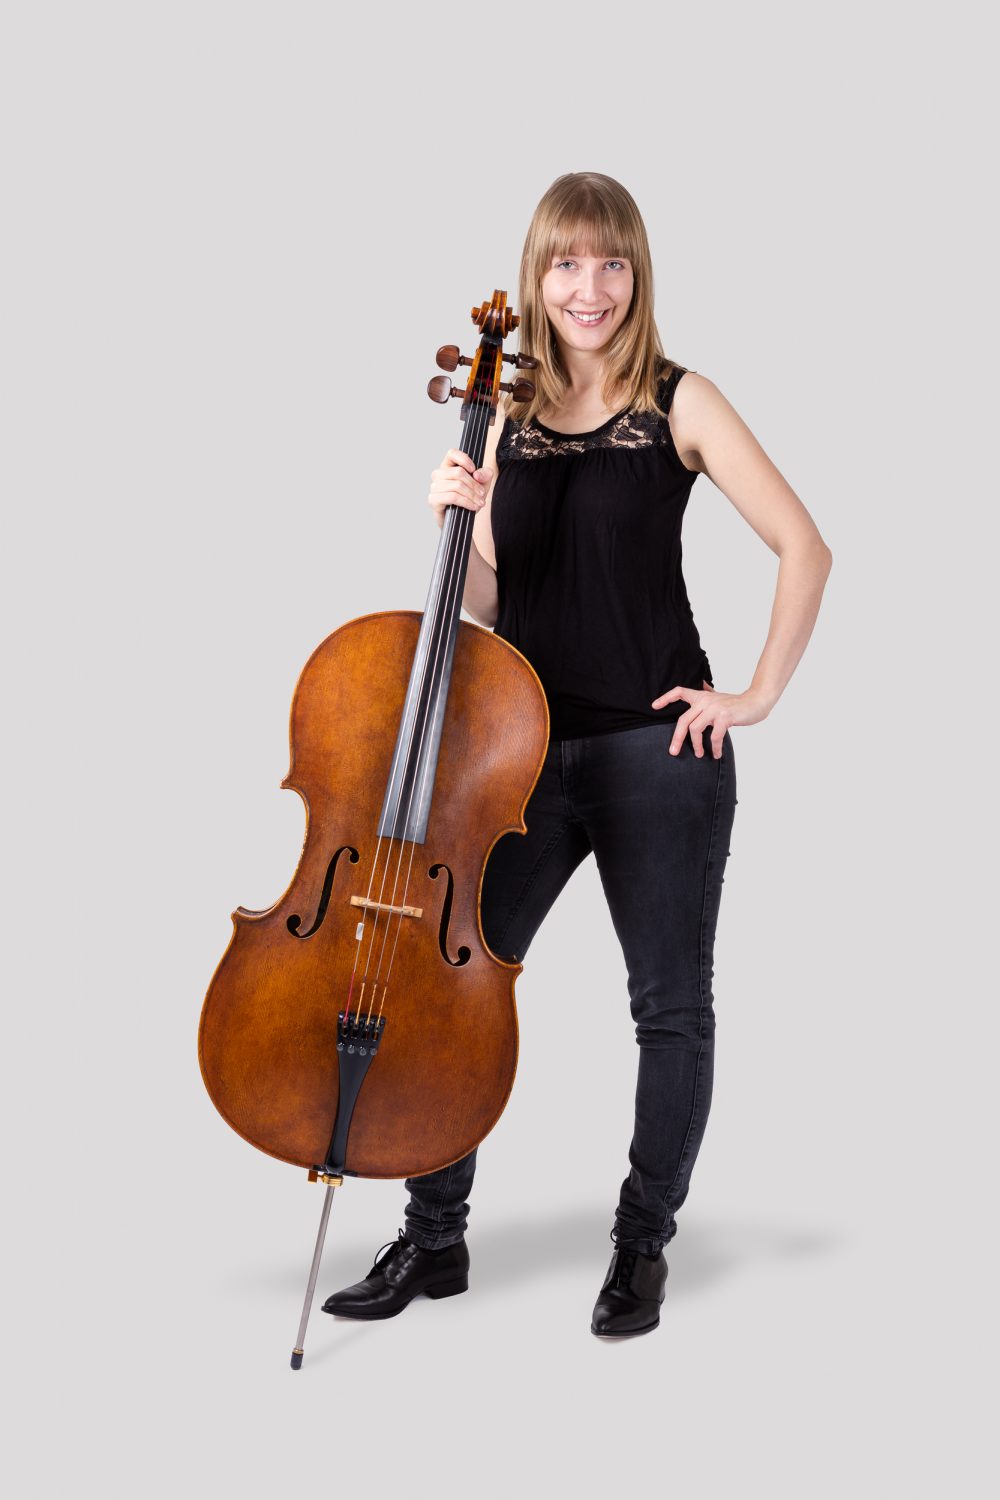 Isabel Gehweiler in casual outfit with cello on side